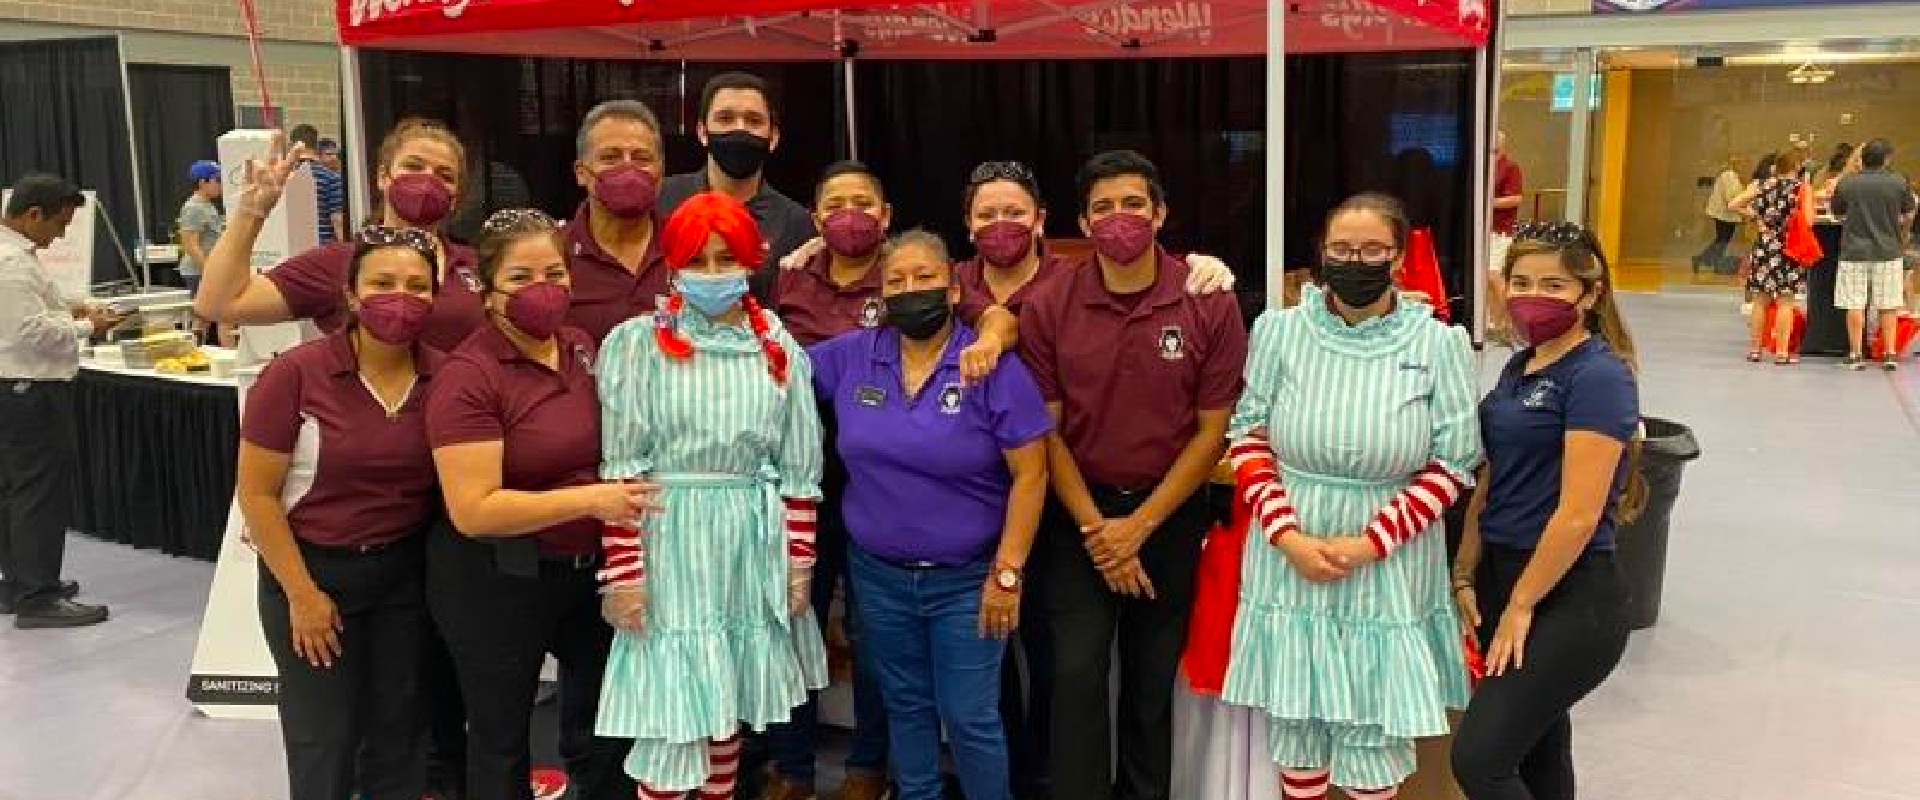 ROUND ROCK WENDY’S PARTICIPATES IN TEXAS SIZE EVENT